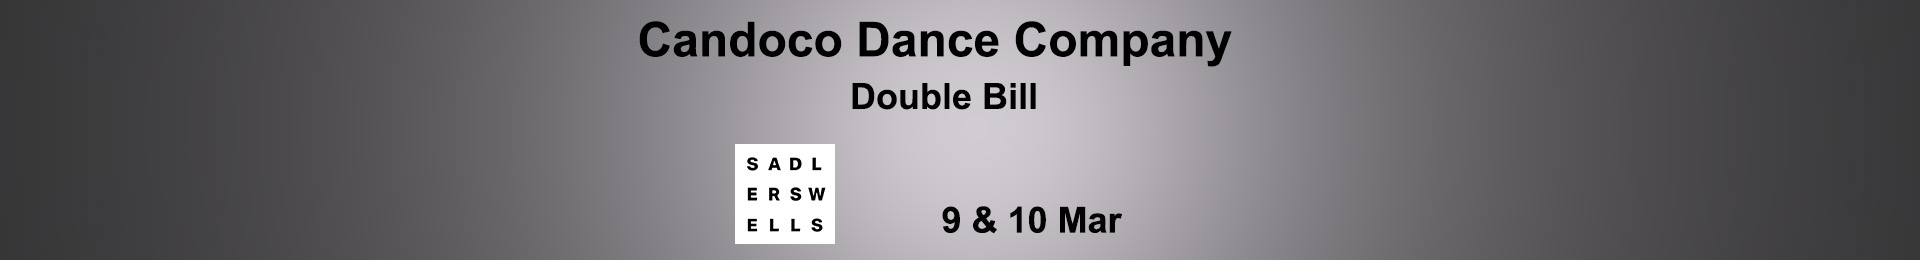 Candoco Dance Company: Double Bill banner image